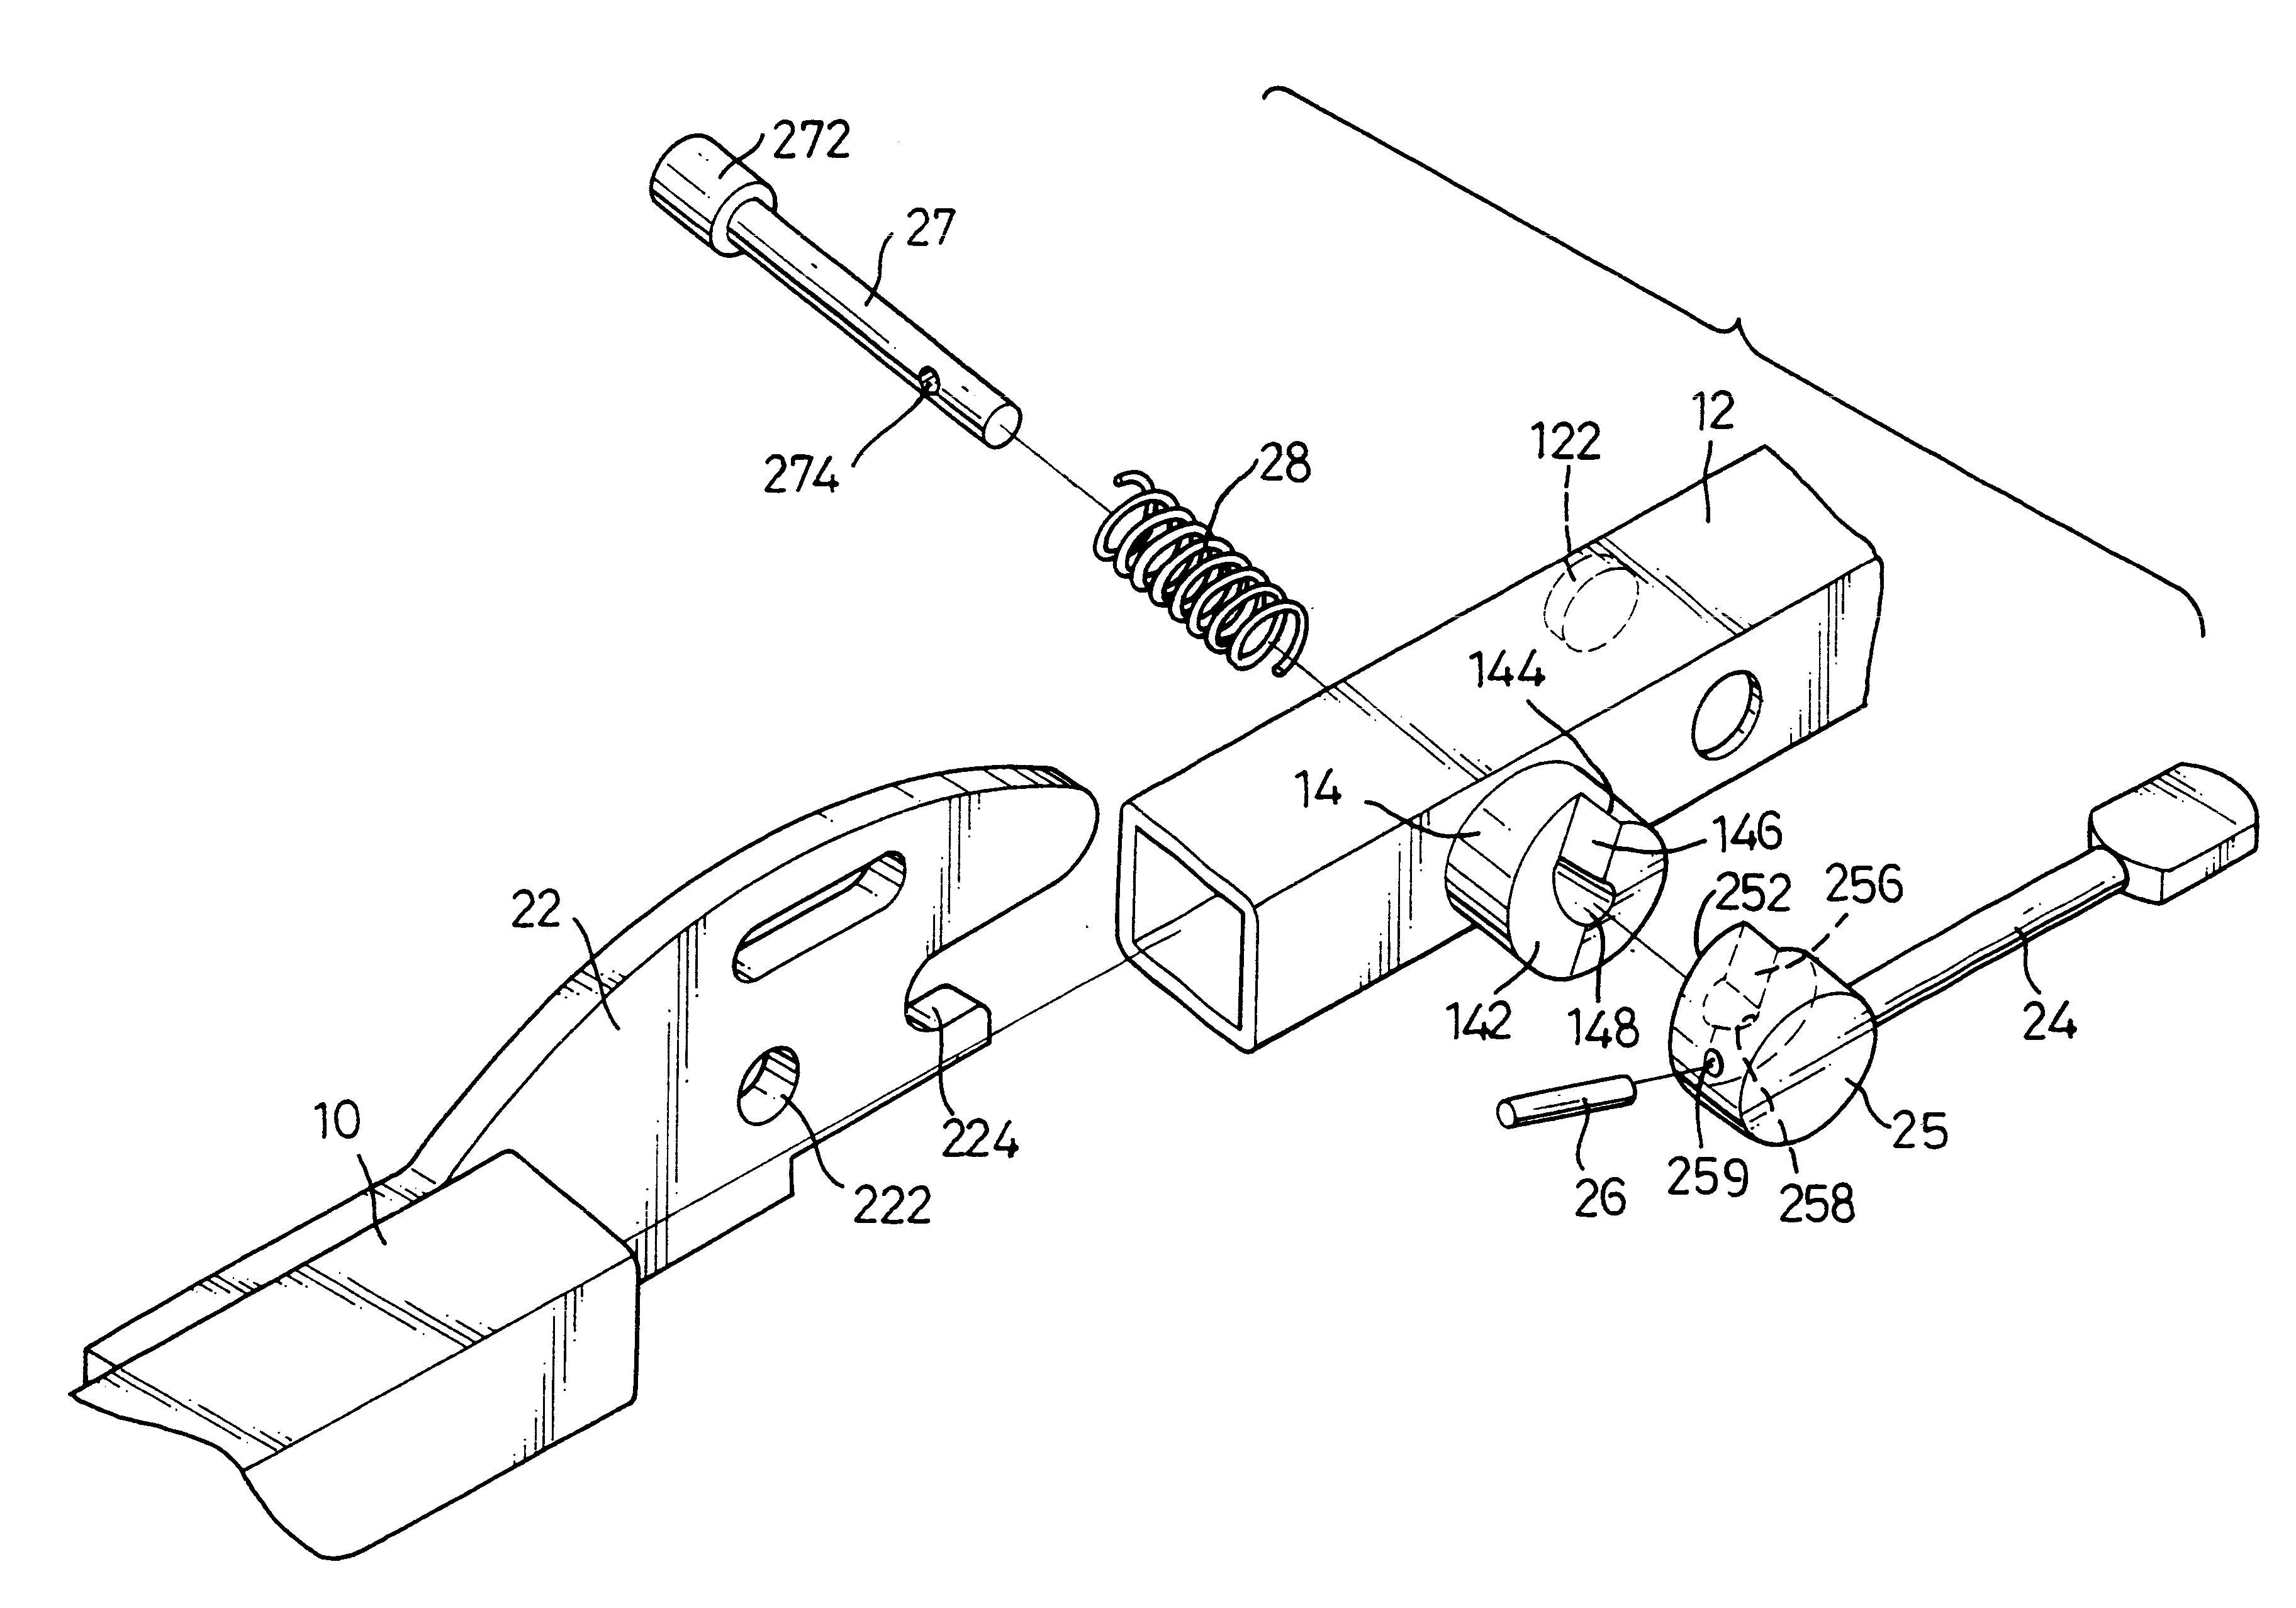 Separable frame for an electric scooter